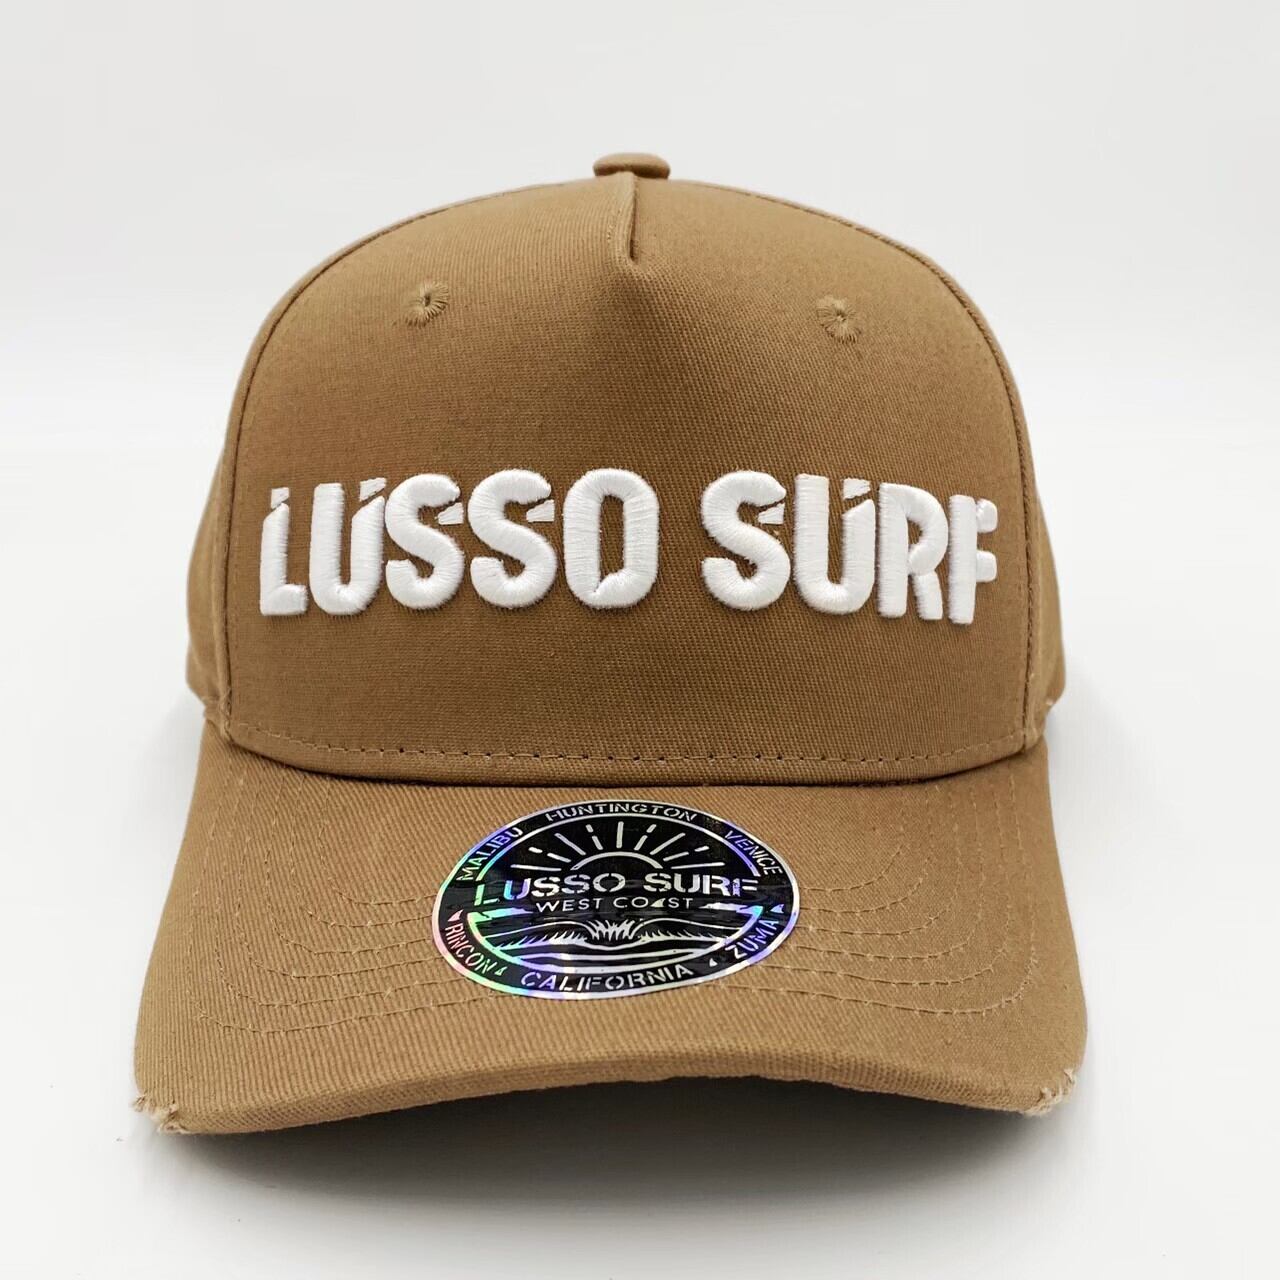 LUSSO SURF Embroidery logo cap【White/Beige】